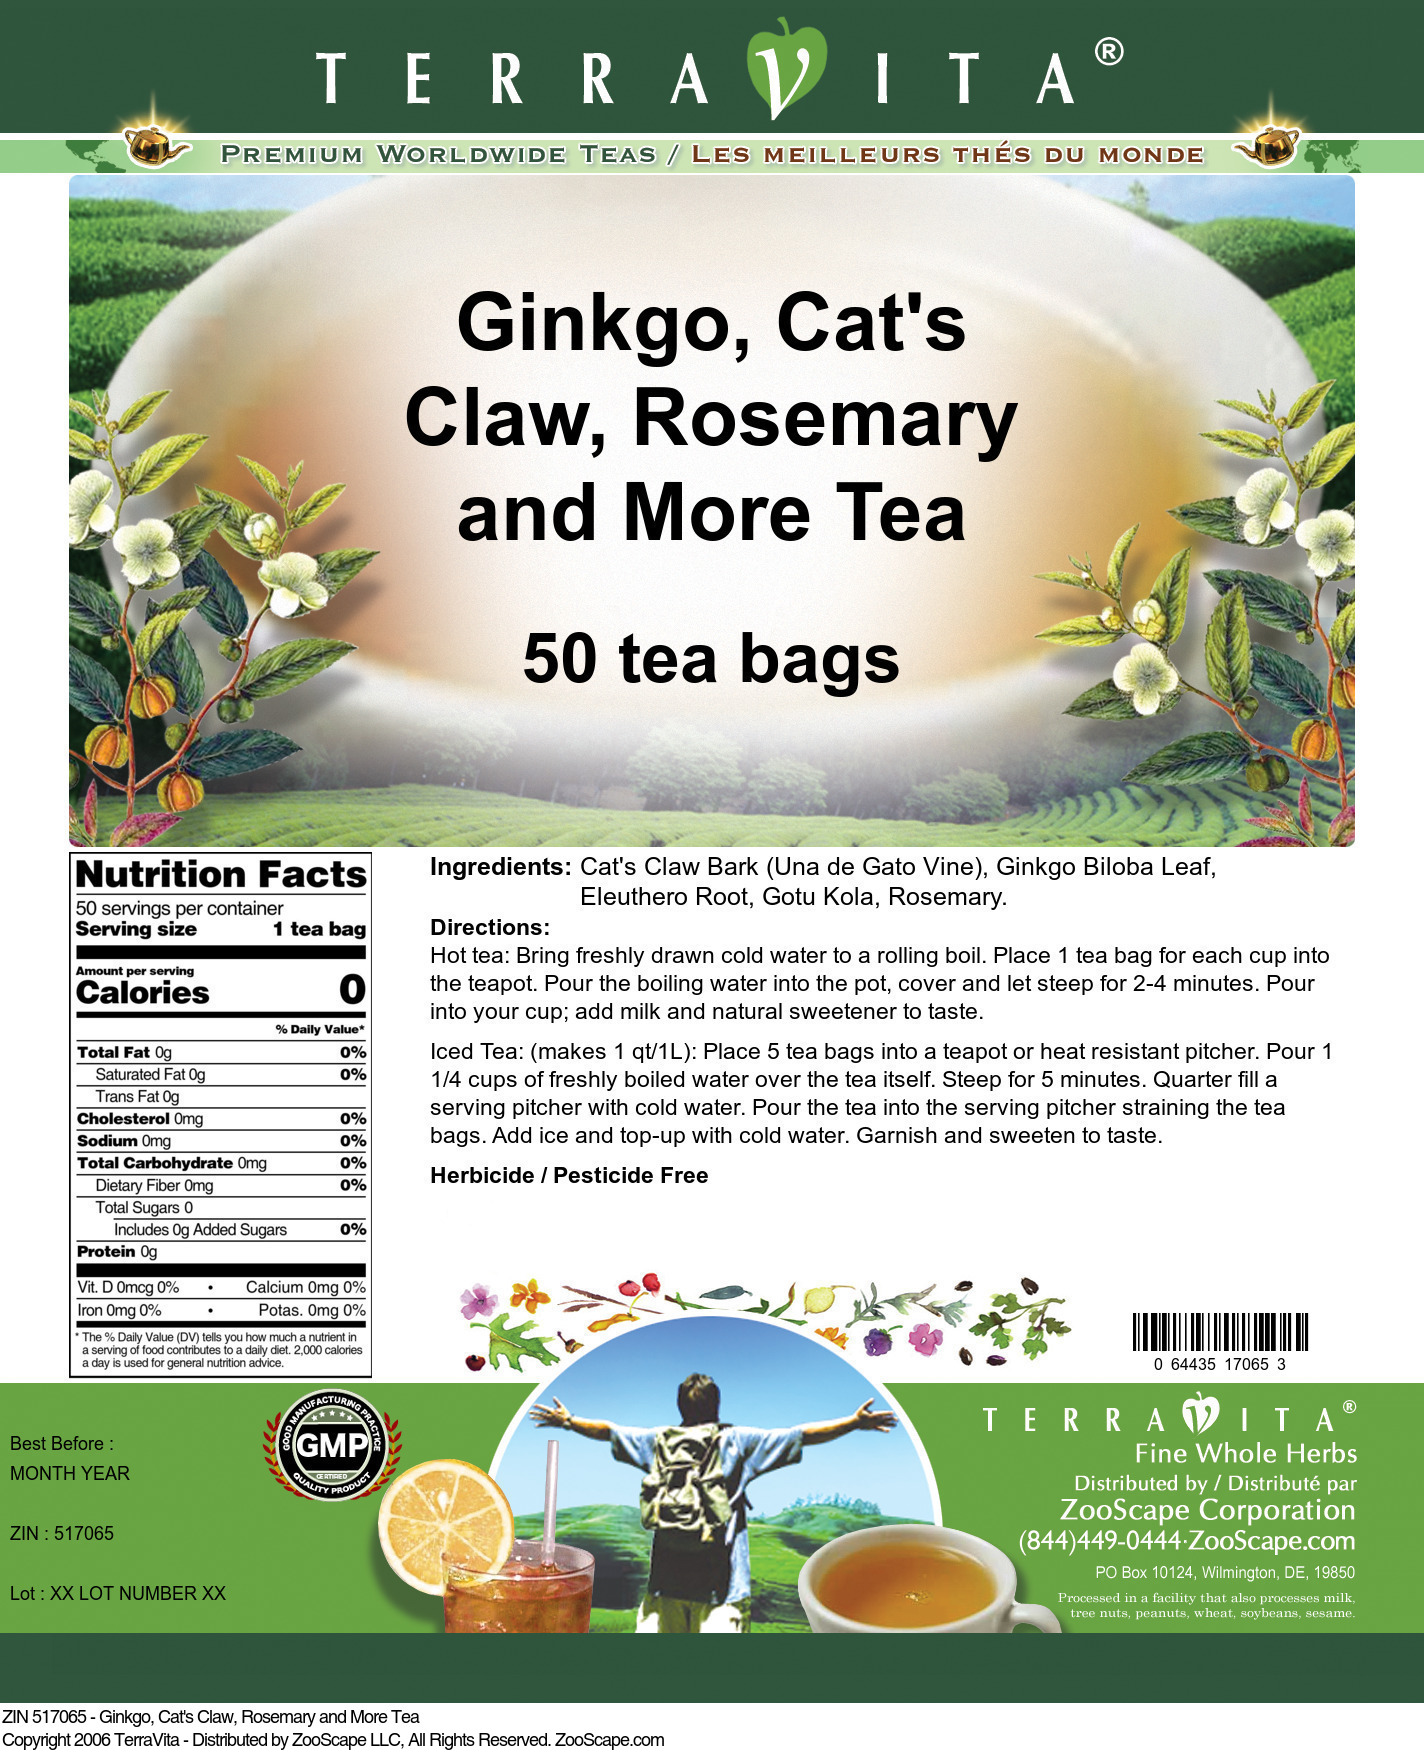 Ginkgo, Cat's Claw, Rosemary and More Tea - Label